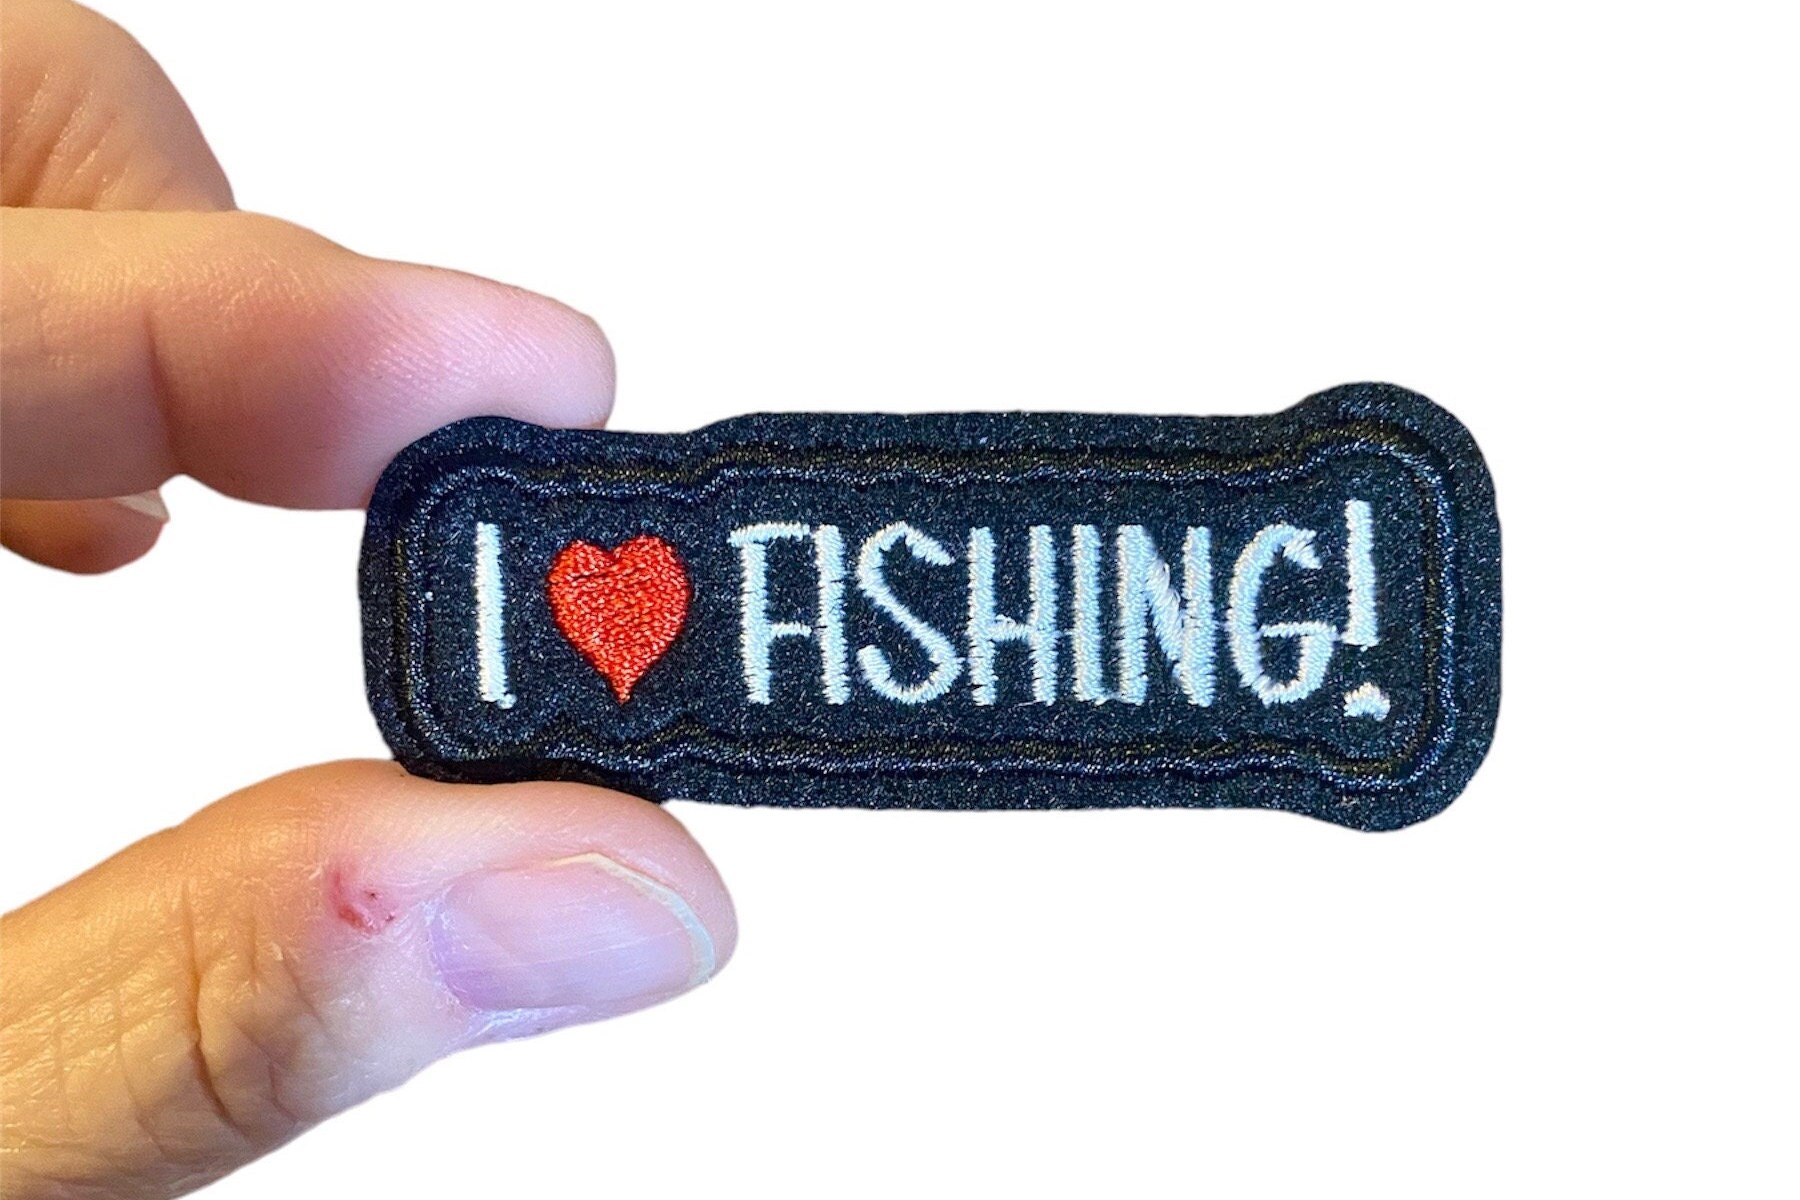 I'd Rather Be Fishing – Funny Embroidered Iron on Patches for Fisherman, Fishing Lovers | Sew on or Iron on Funny Saying Applique Patches for